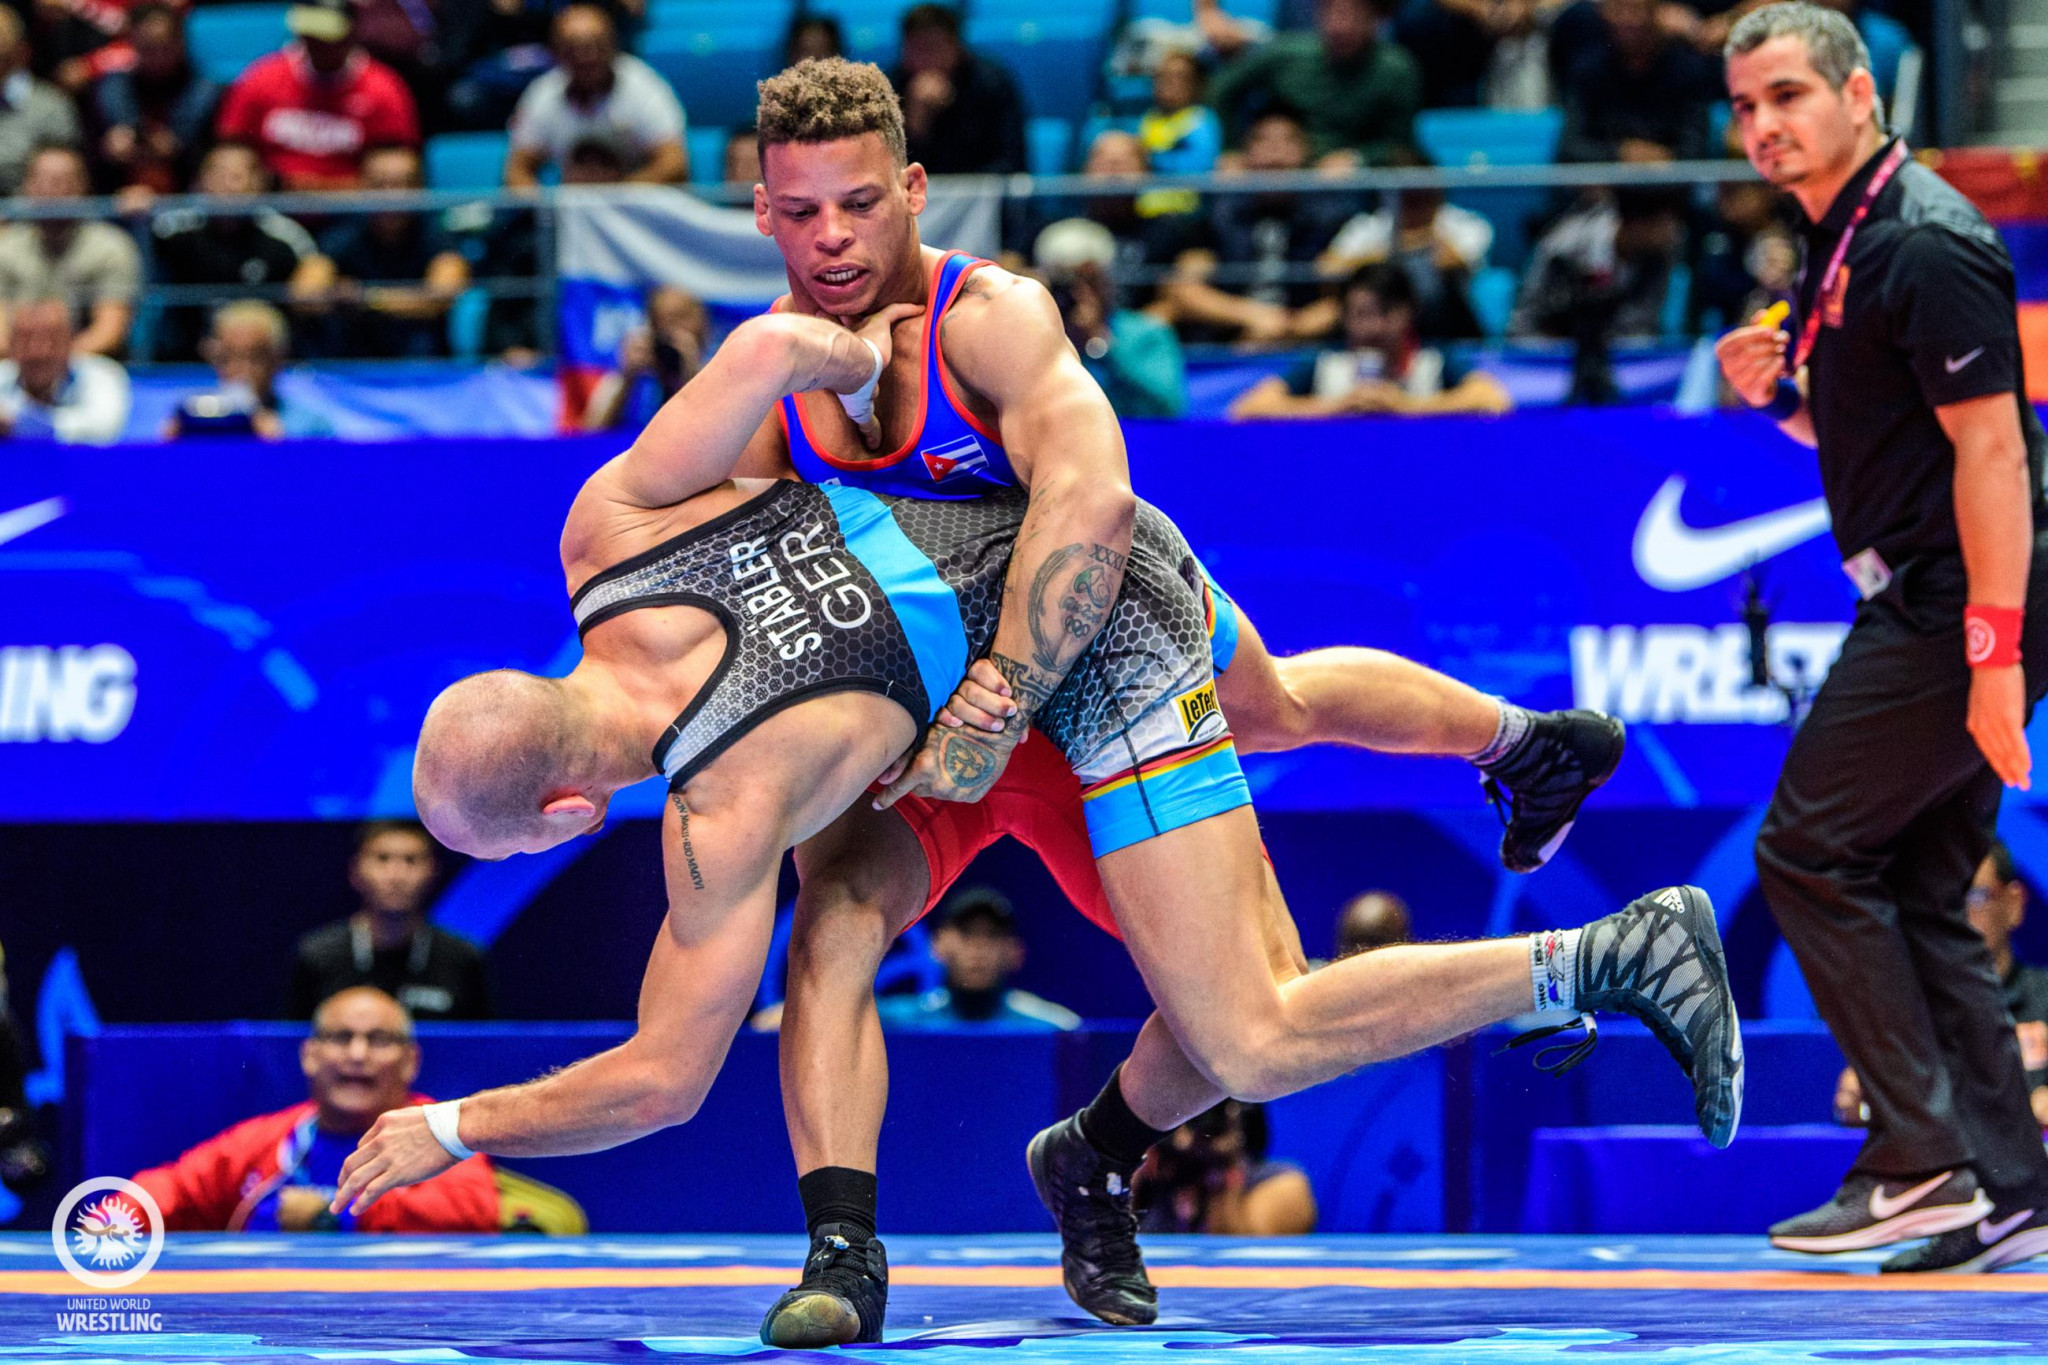 United States win three golds on day one of Pan American Wrestling